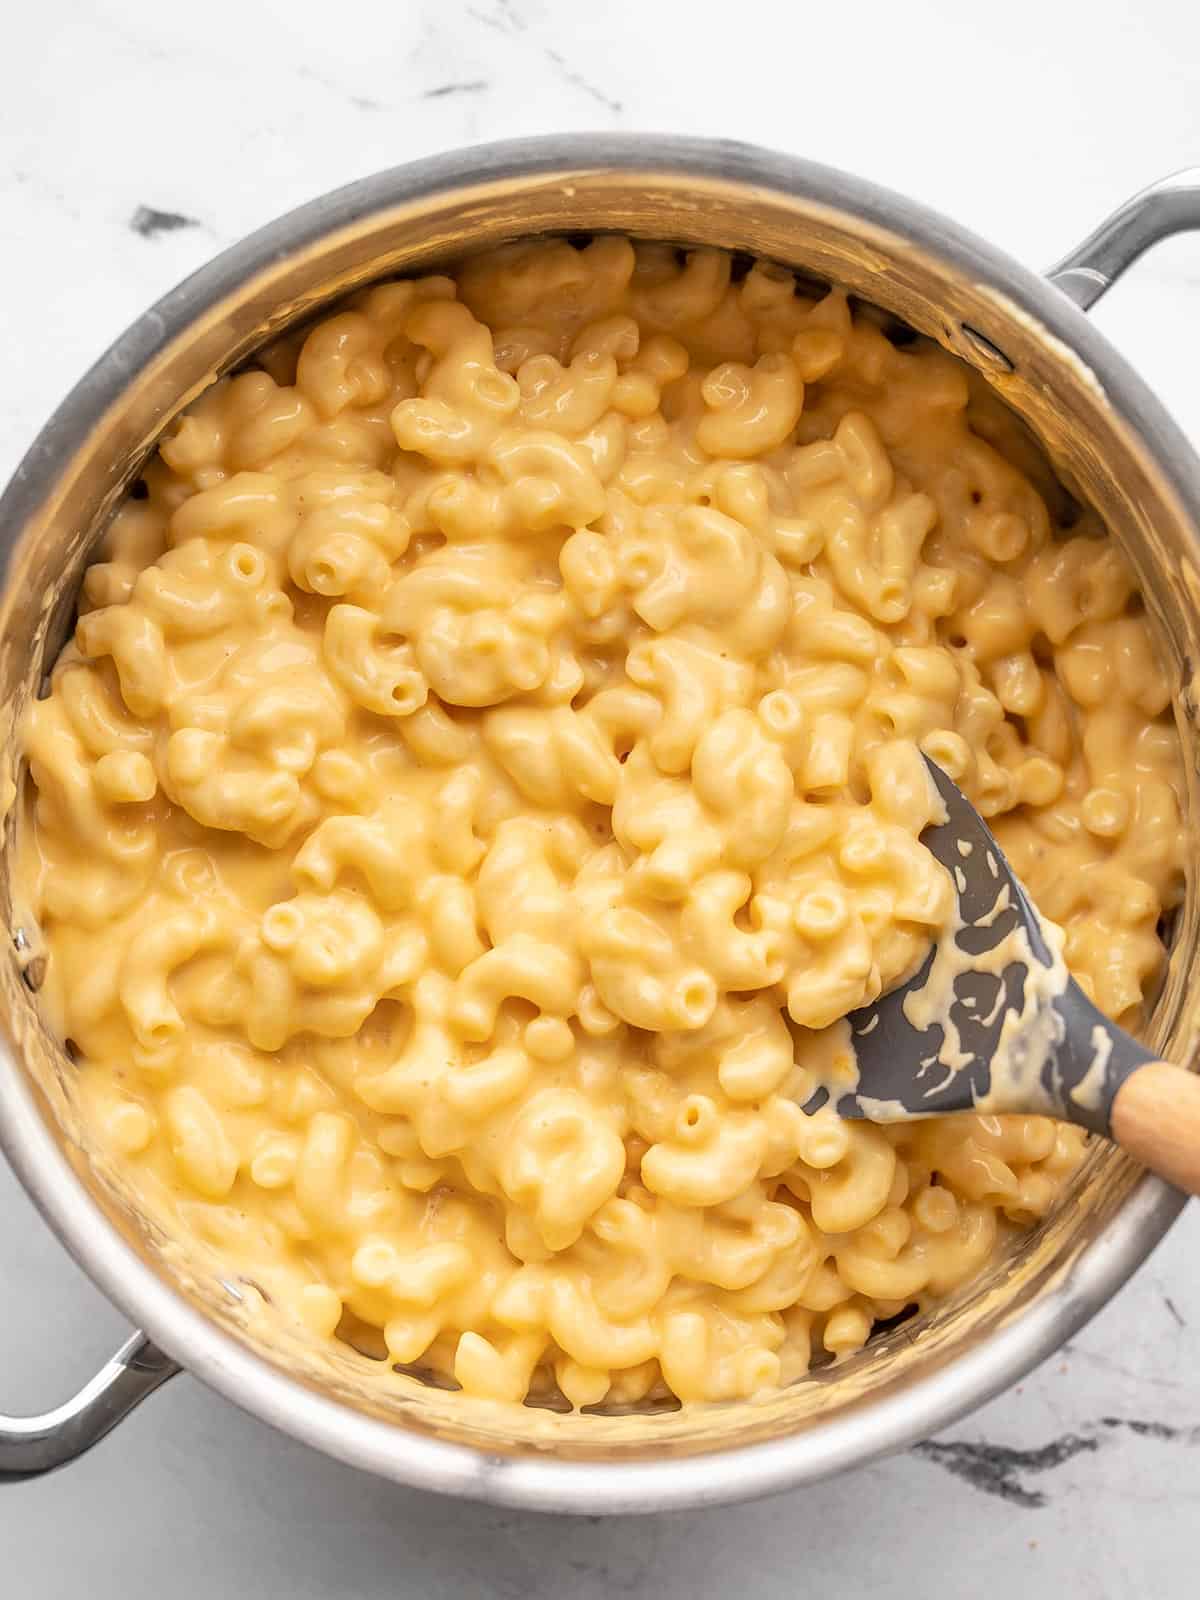 Finished mac and cheese in the pot